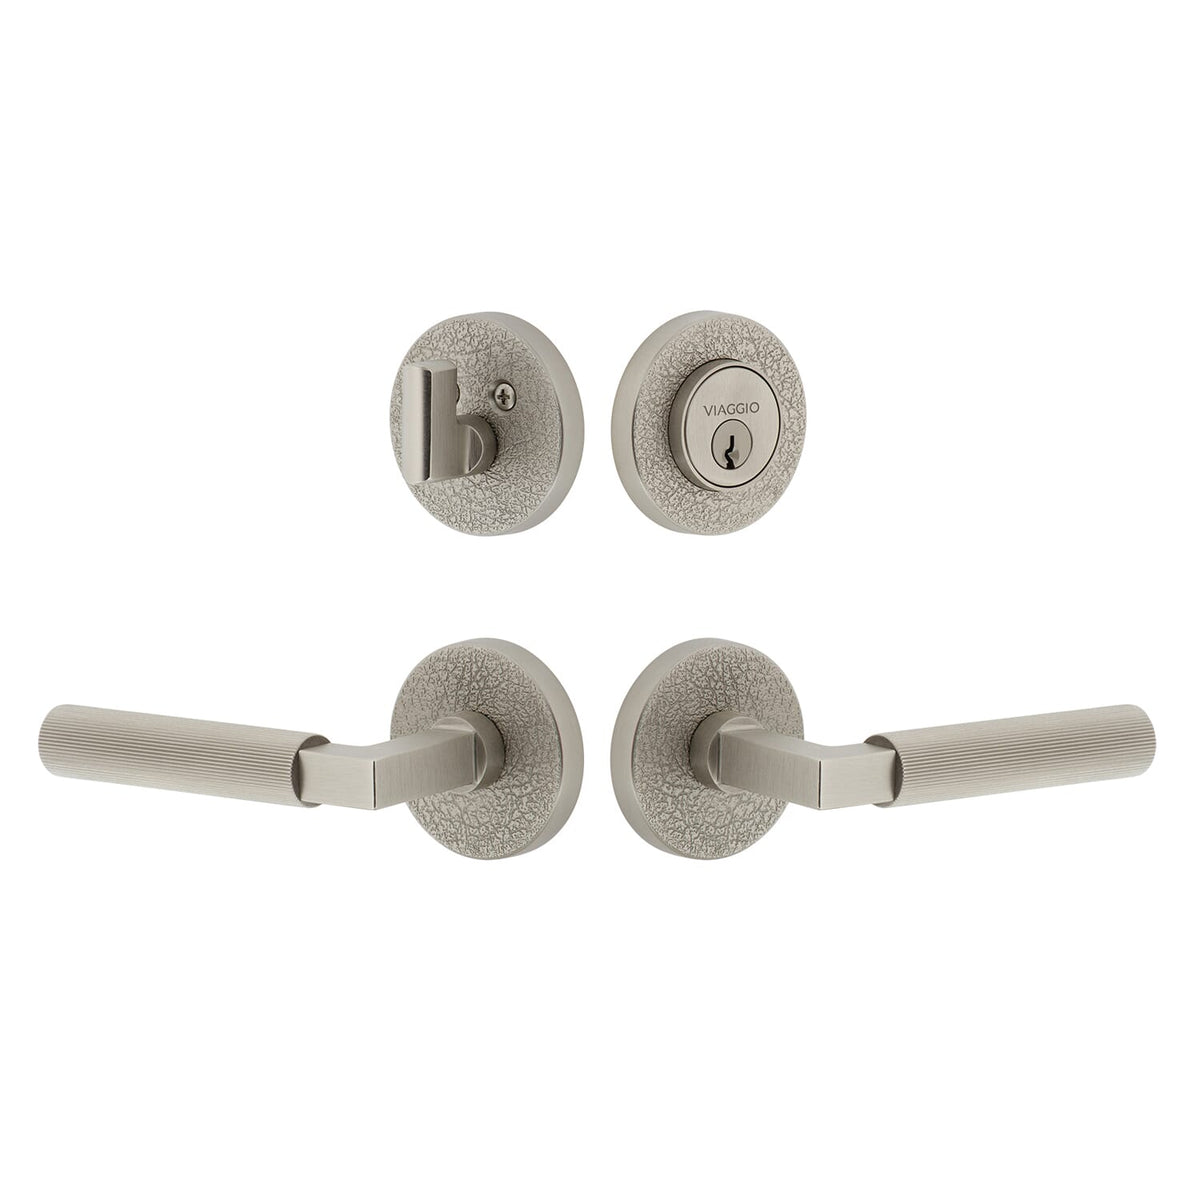 Circolo Leather Rosette Entry Set with Contempo Fluted Lever  in Satin Nickel